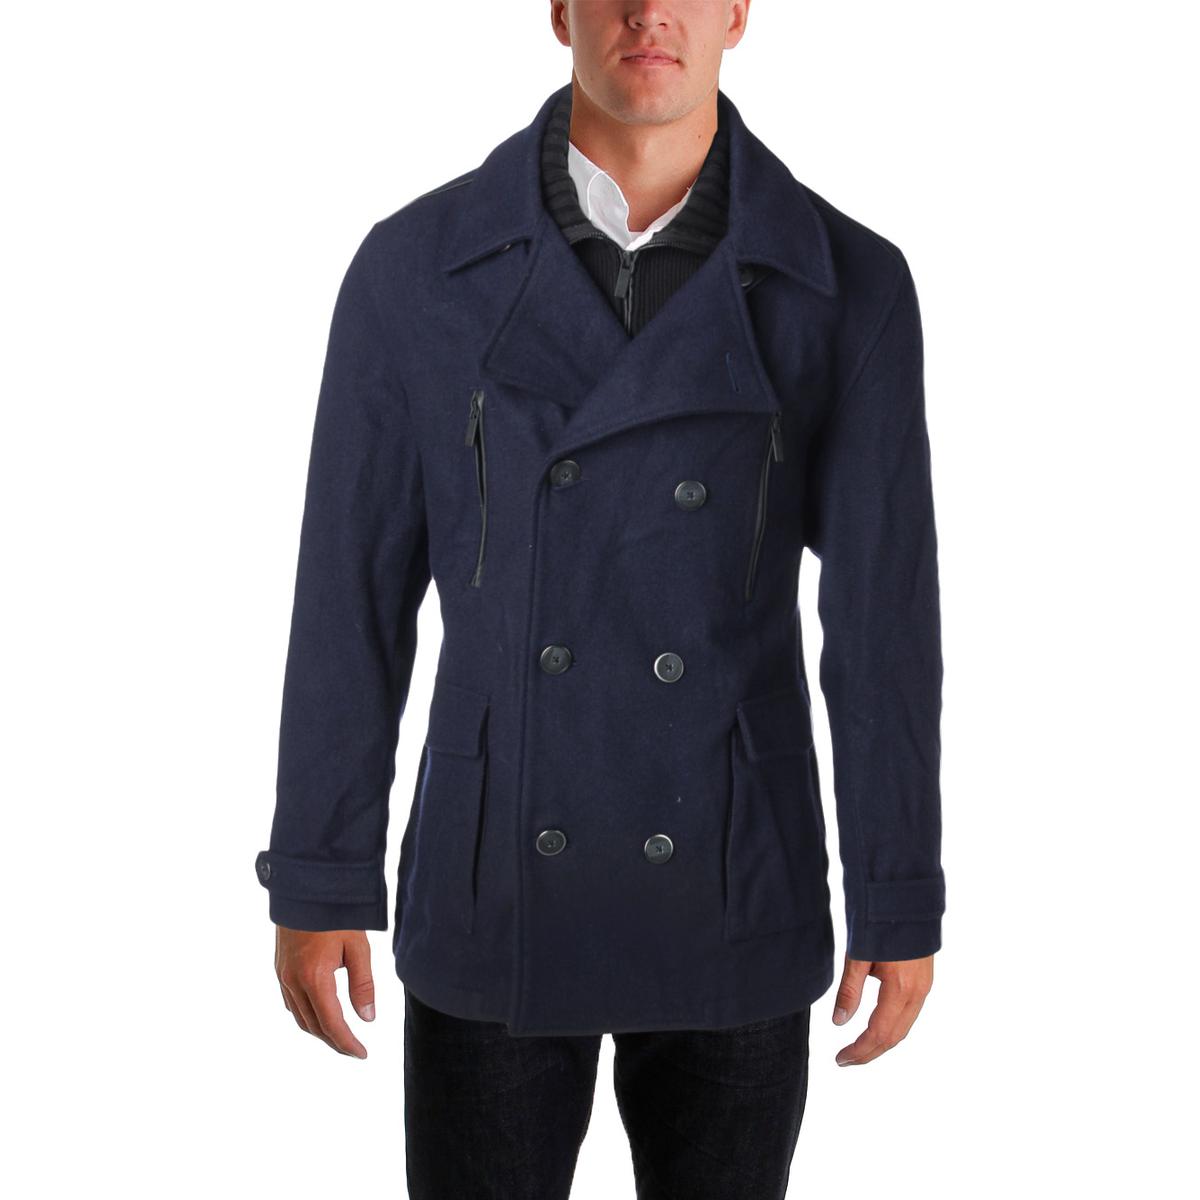 Kenneth Cole Reaction 5933 Mens Wool Blend Double-Breasted Pea Coat ...